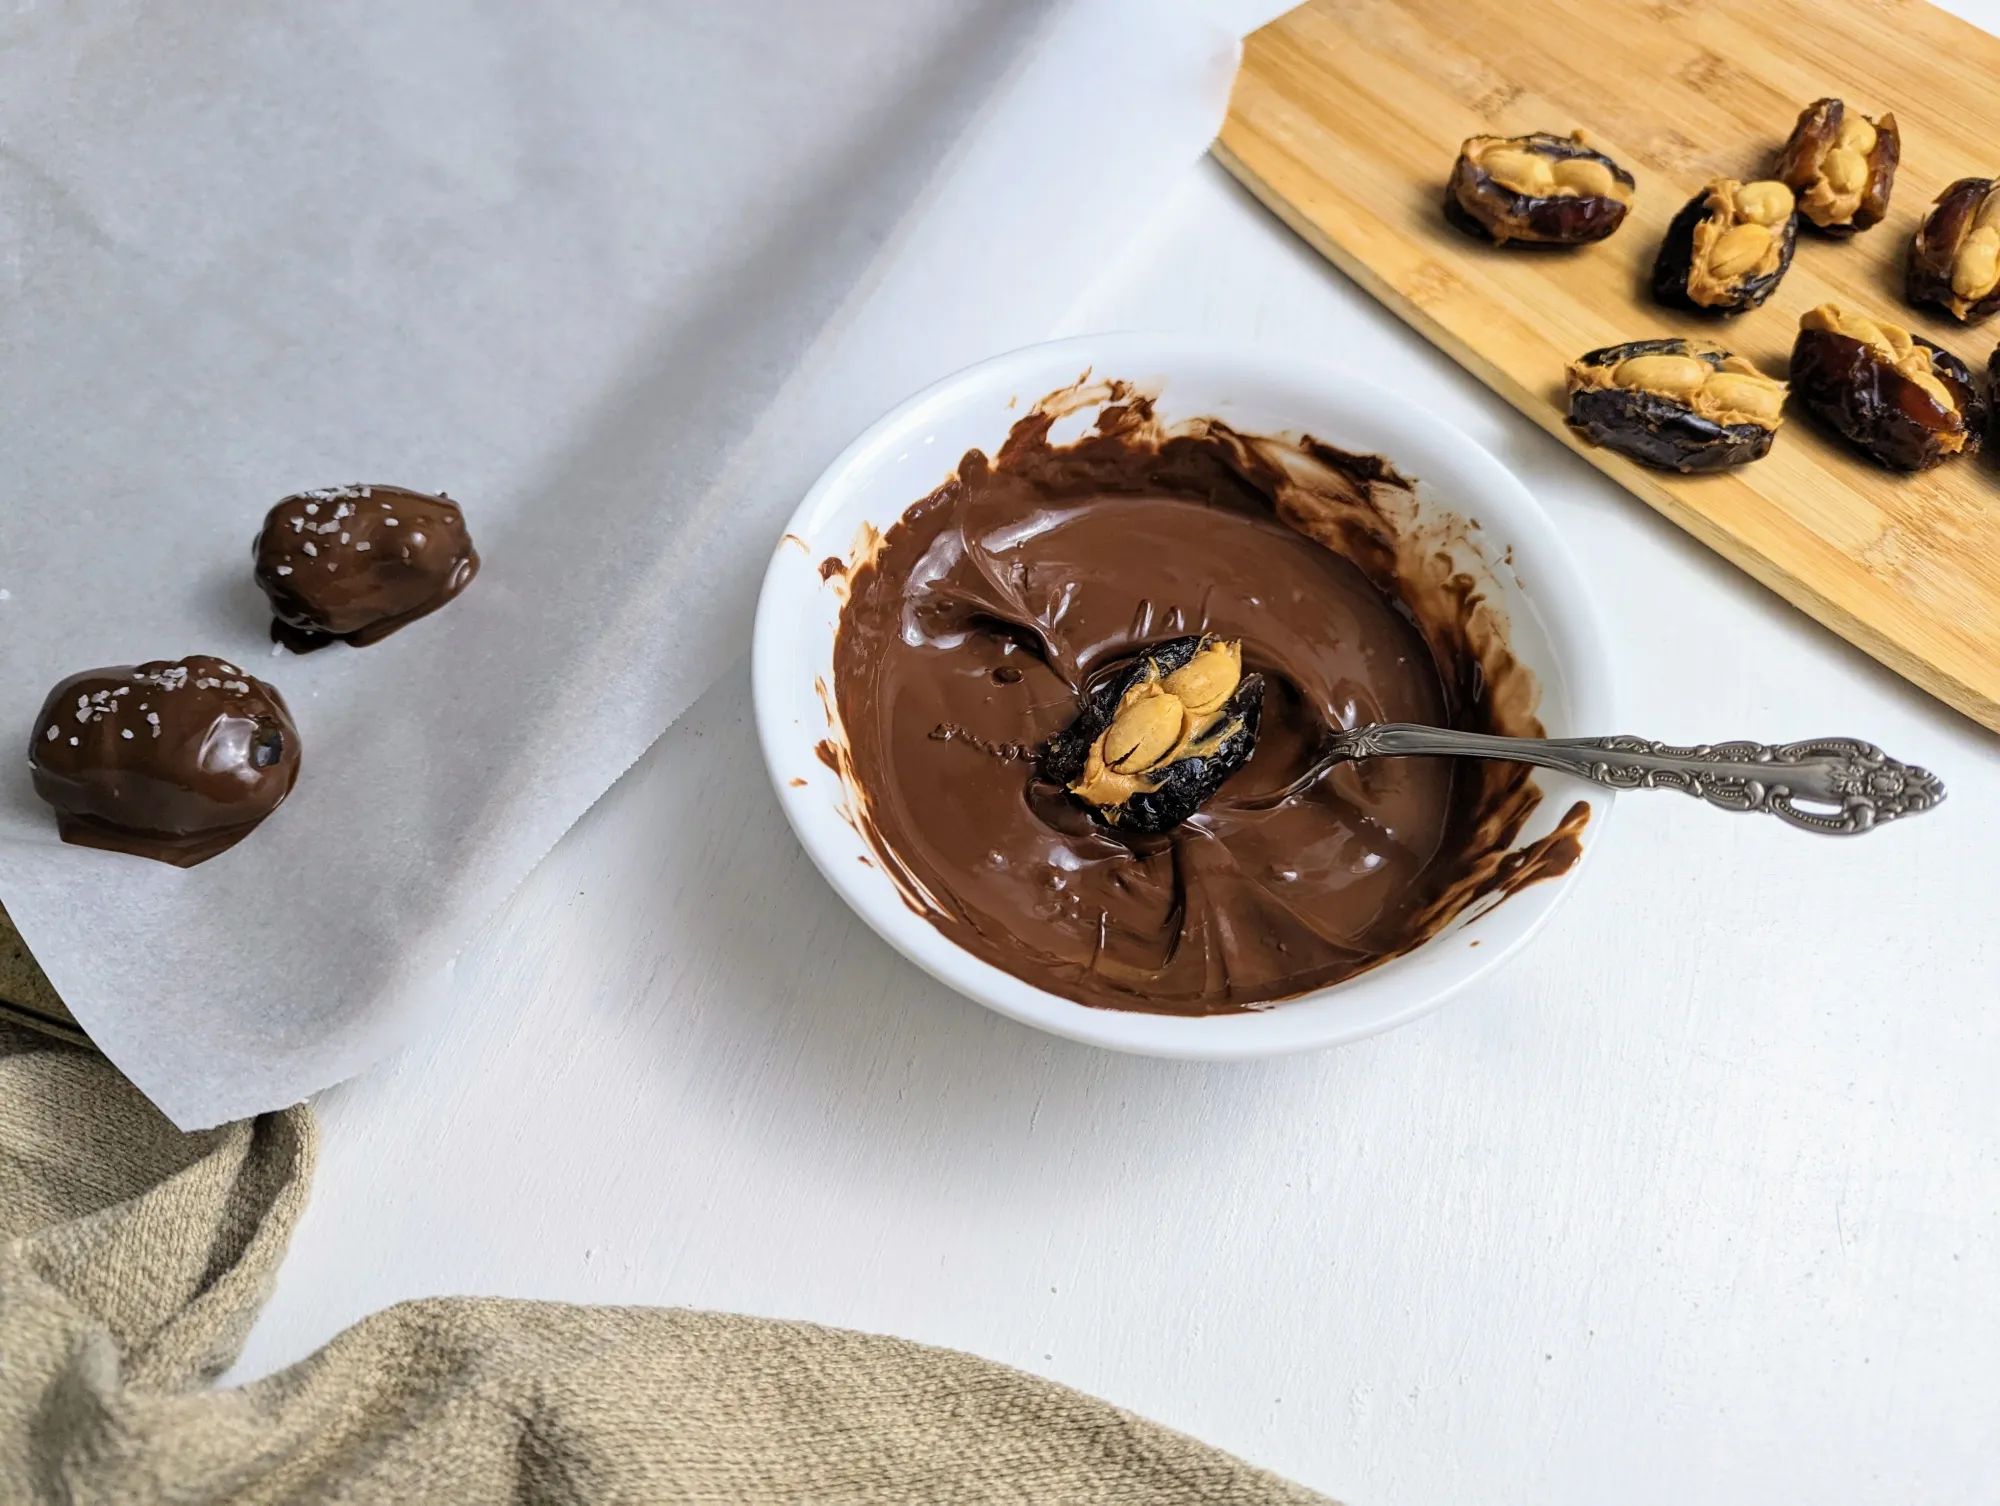 Stuffed date in a bowl of melted chocolate